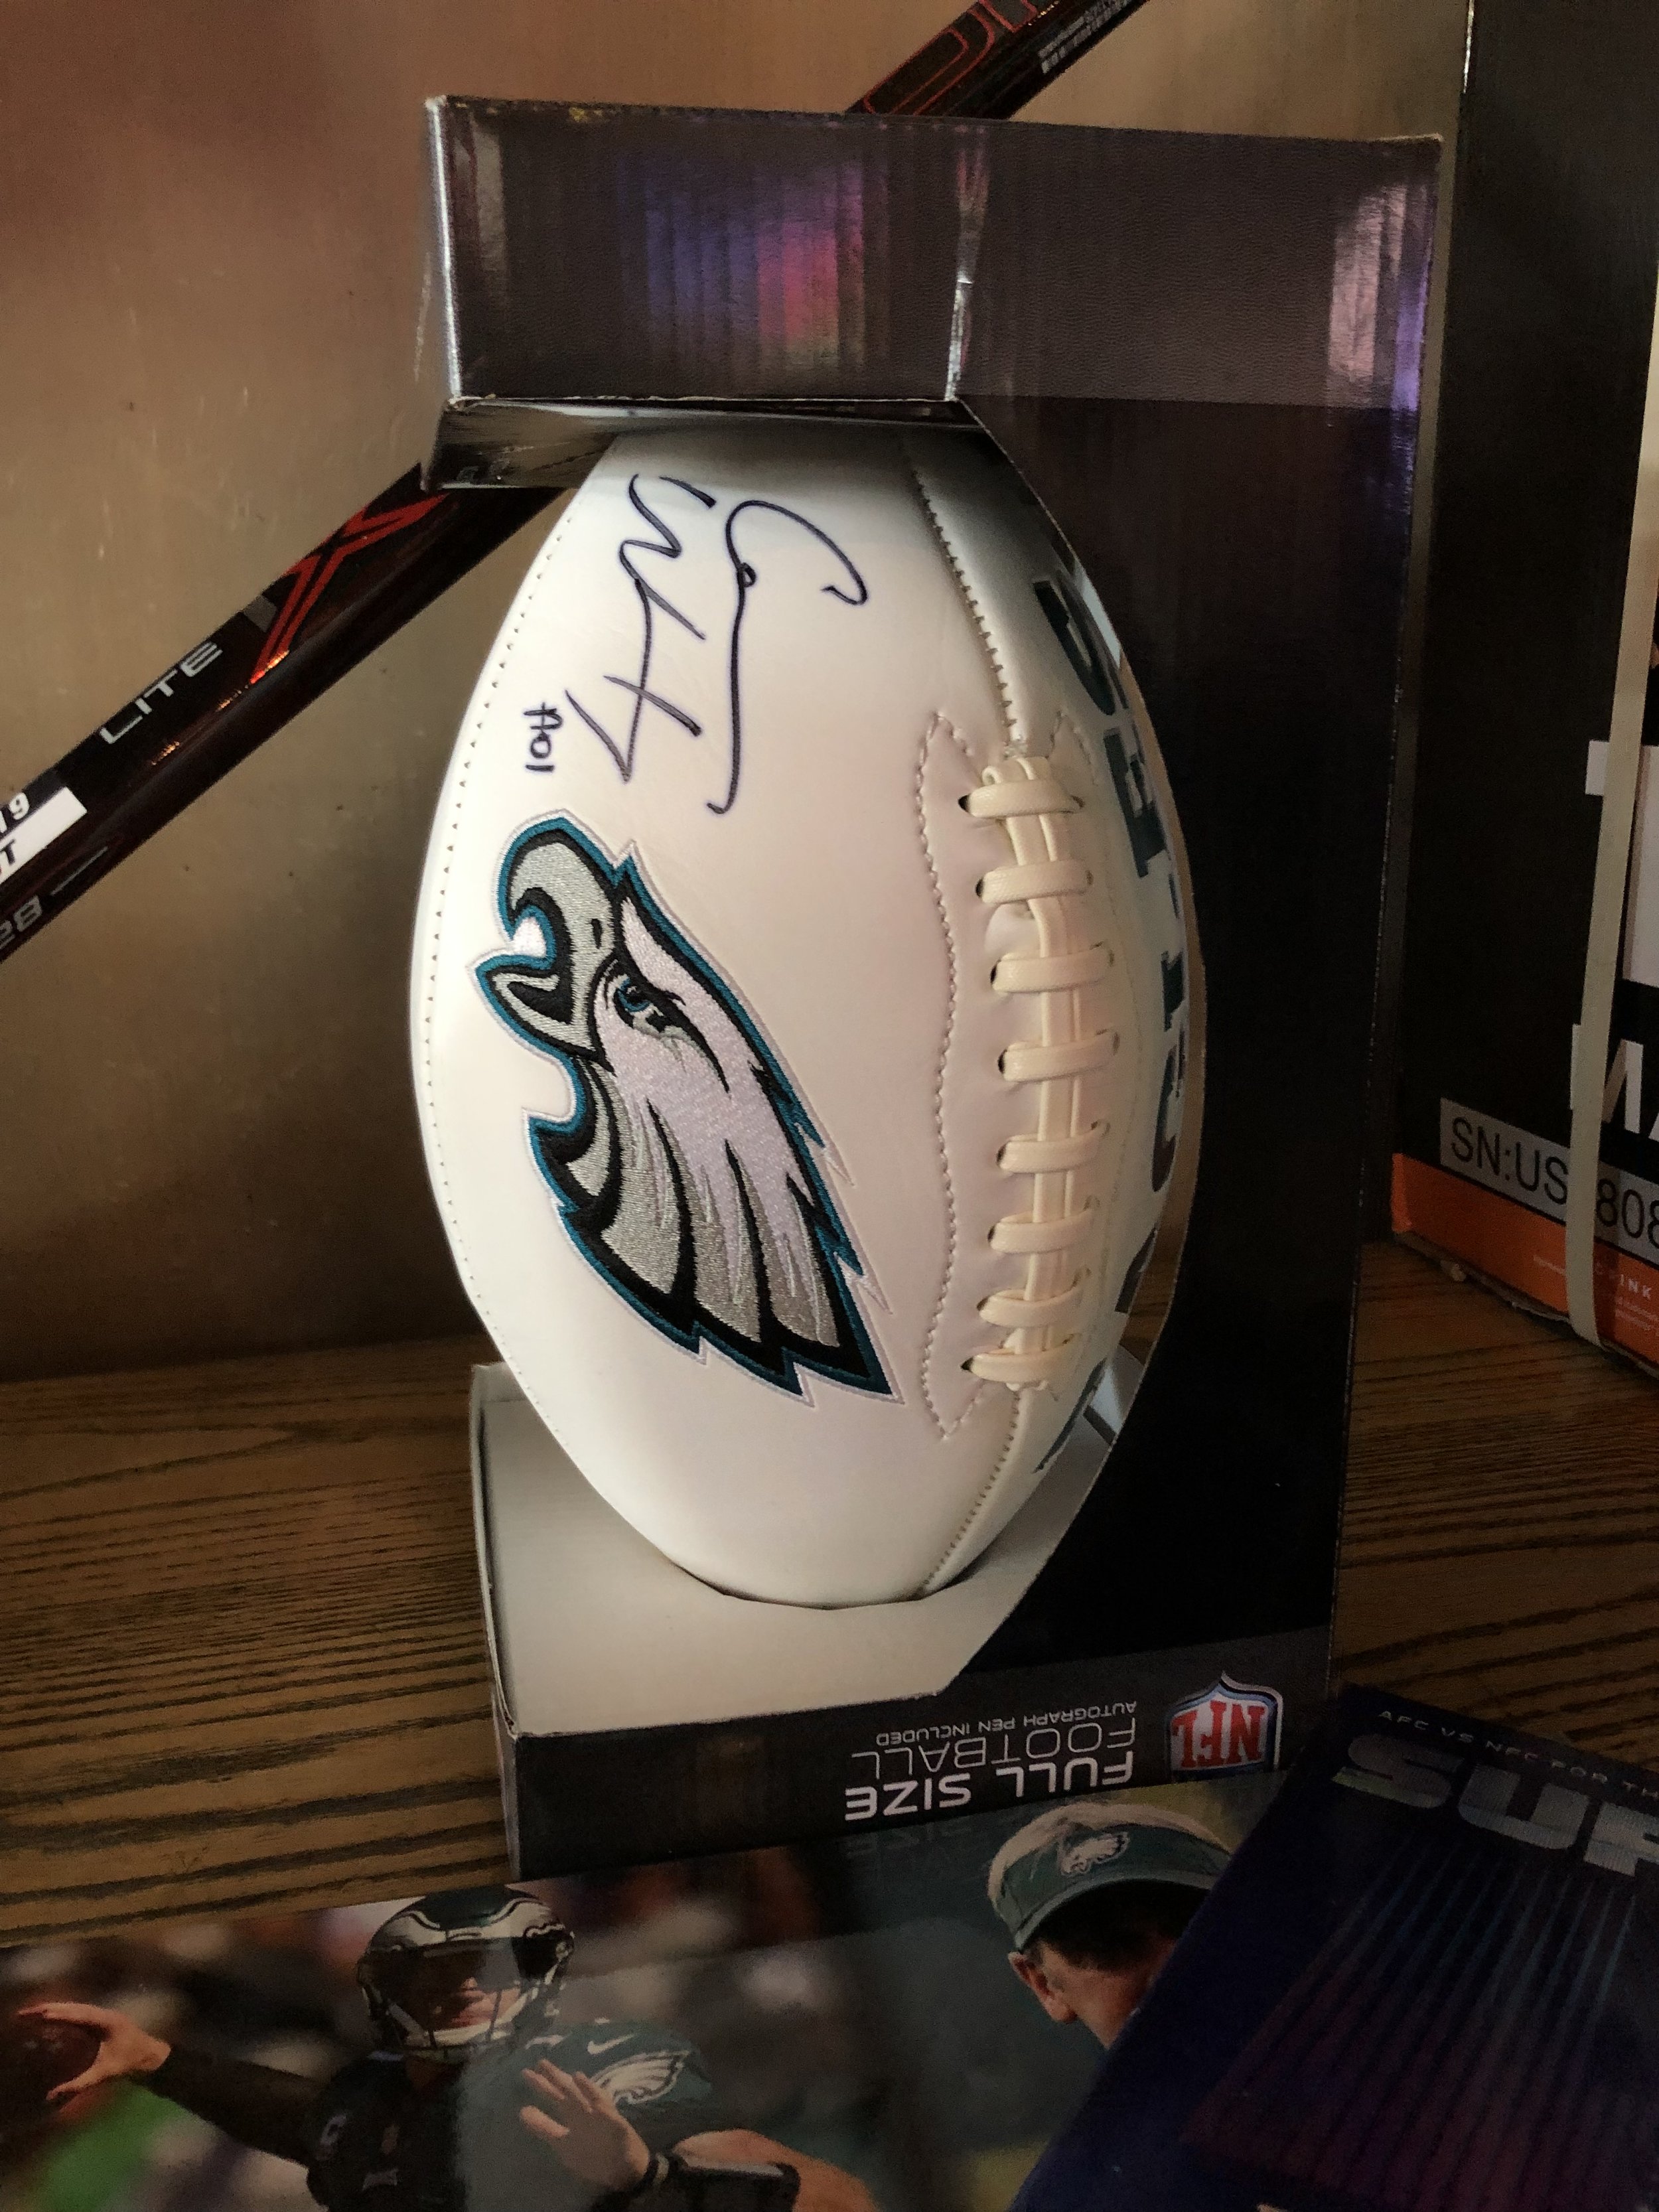  One of our many top-shelf prizes: an officially licensed Eagles football signed by Carson Wentz 